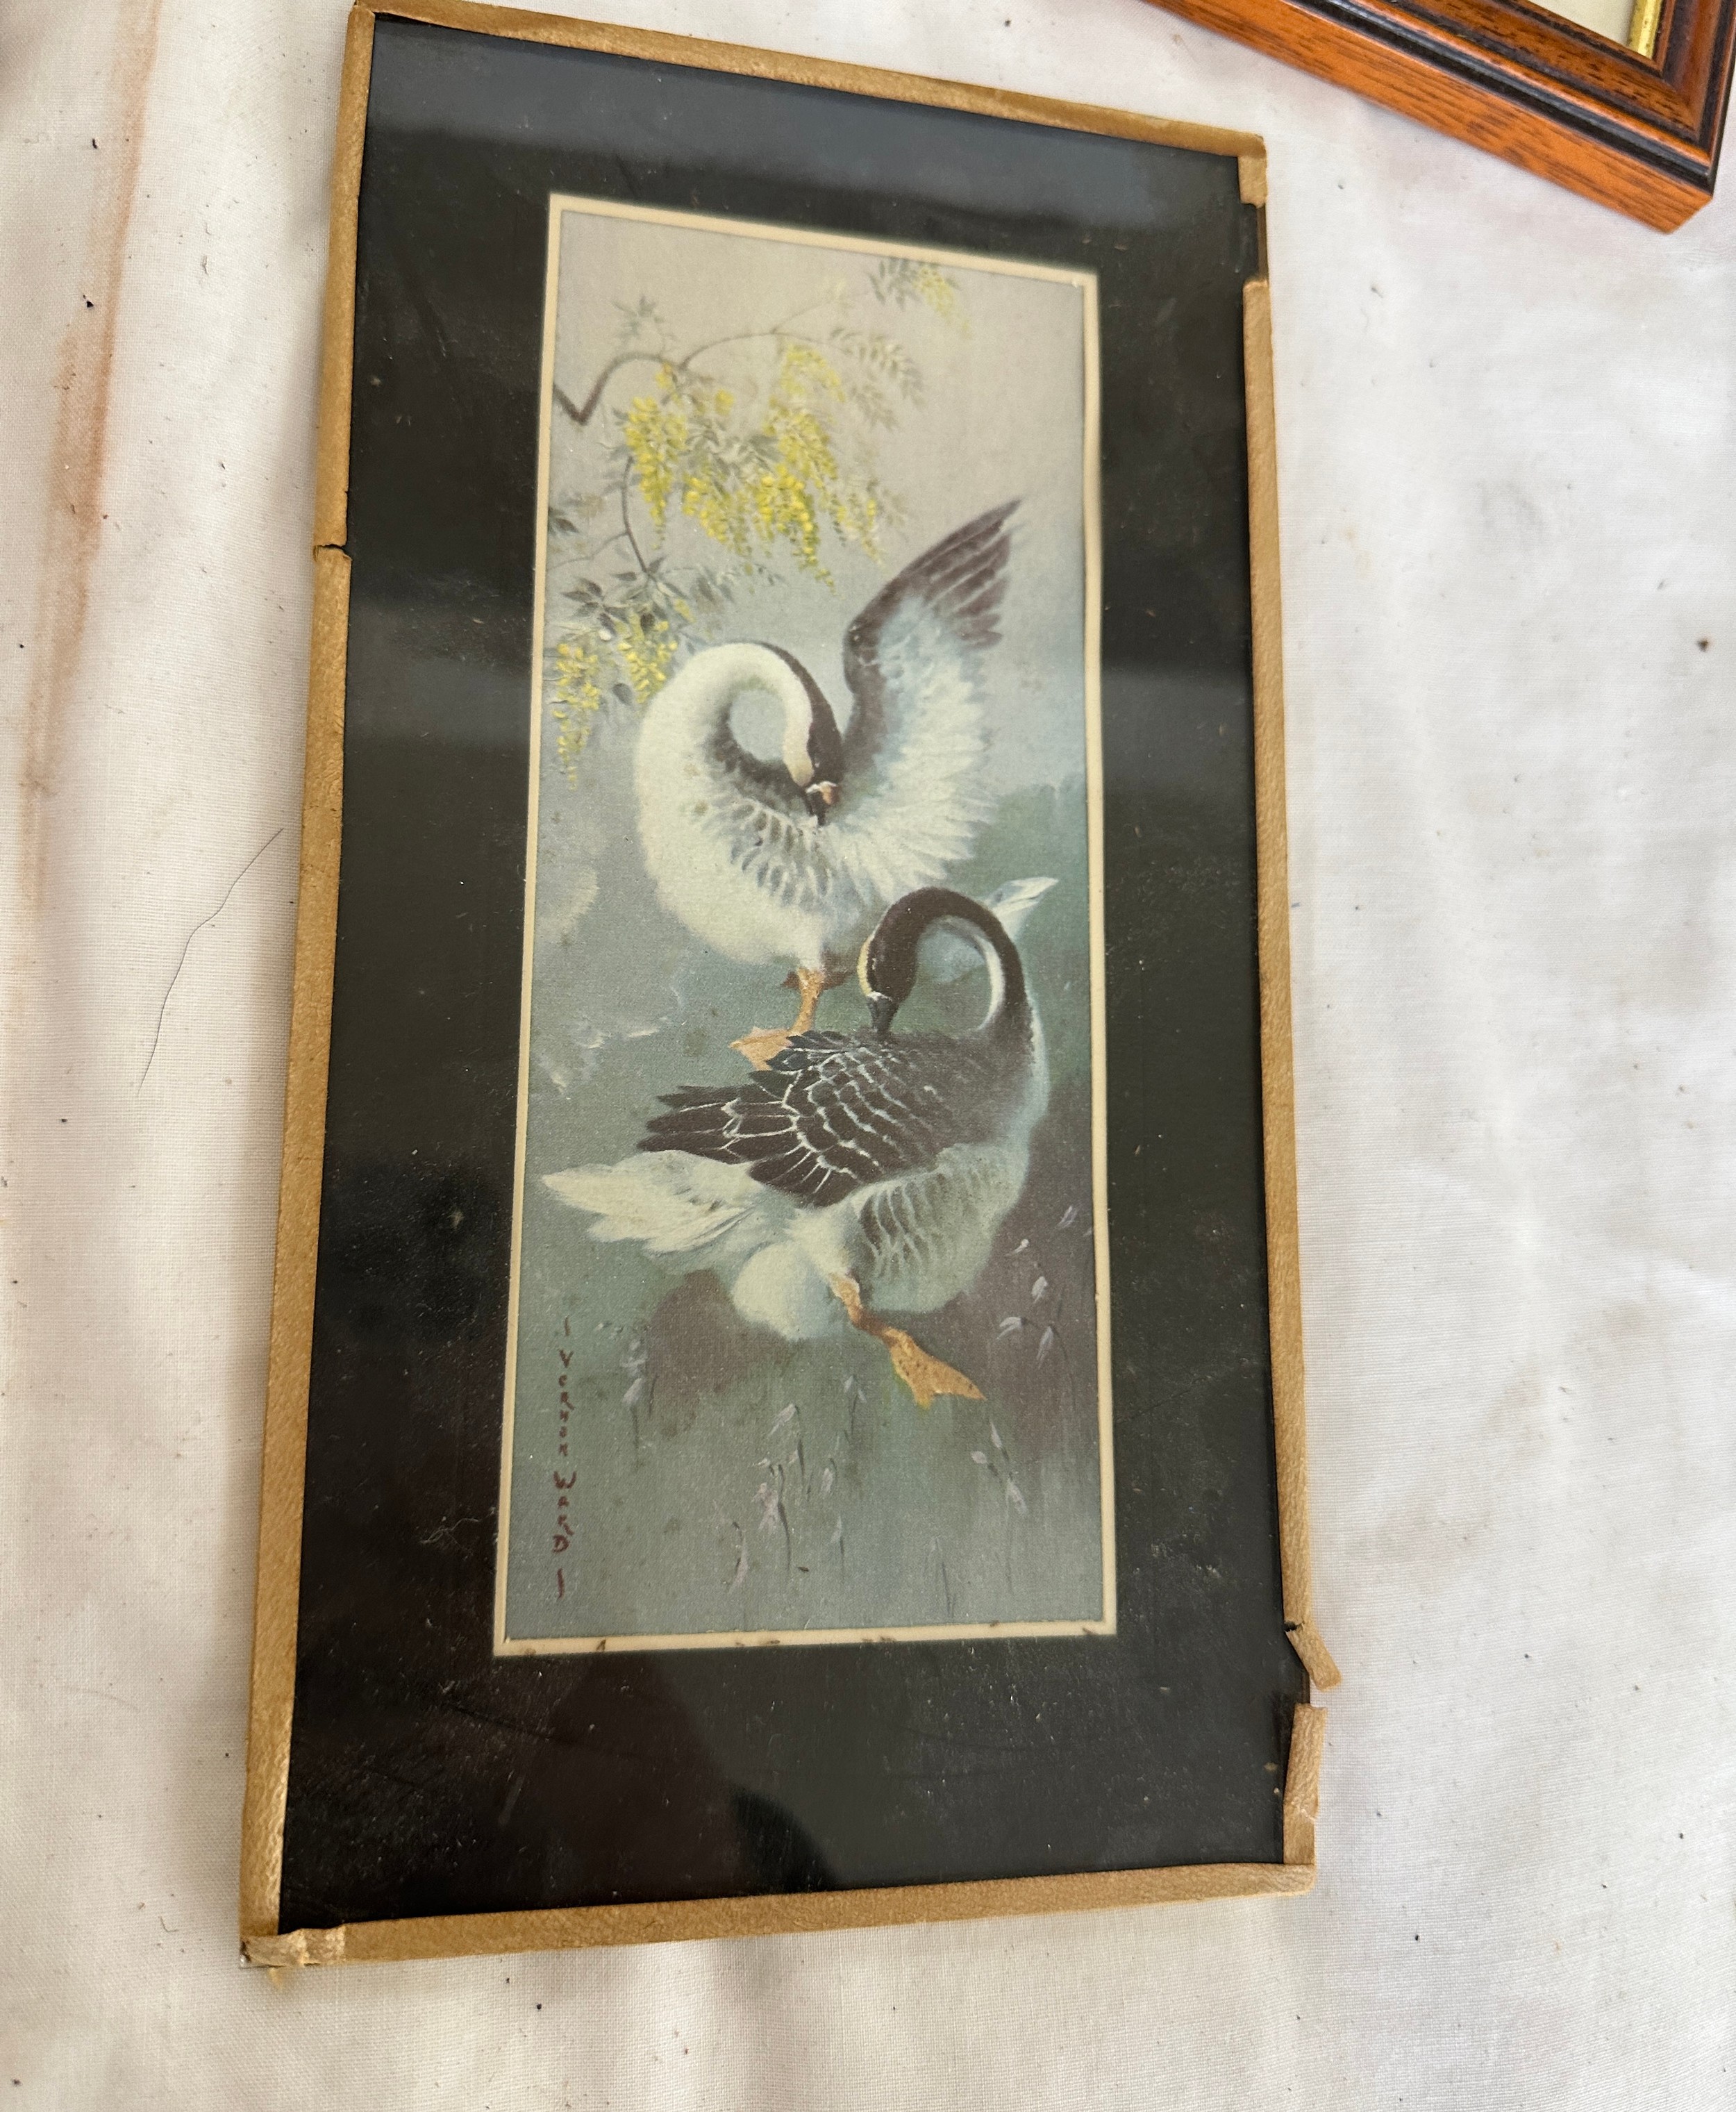 Framed prints by Shirley Carnt, Signed watercolour by Melvyn R J Brinkley, Watercolour by John - Image 7 of 8